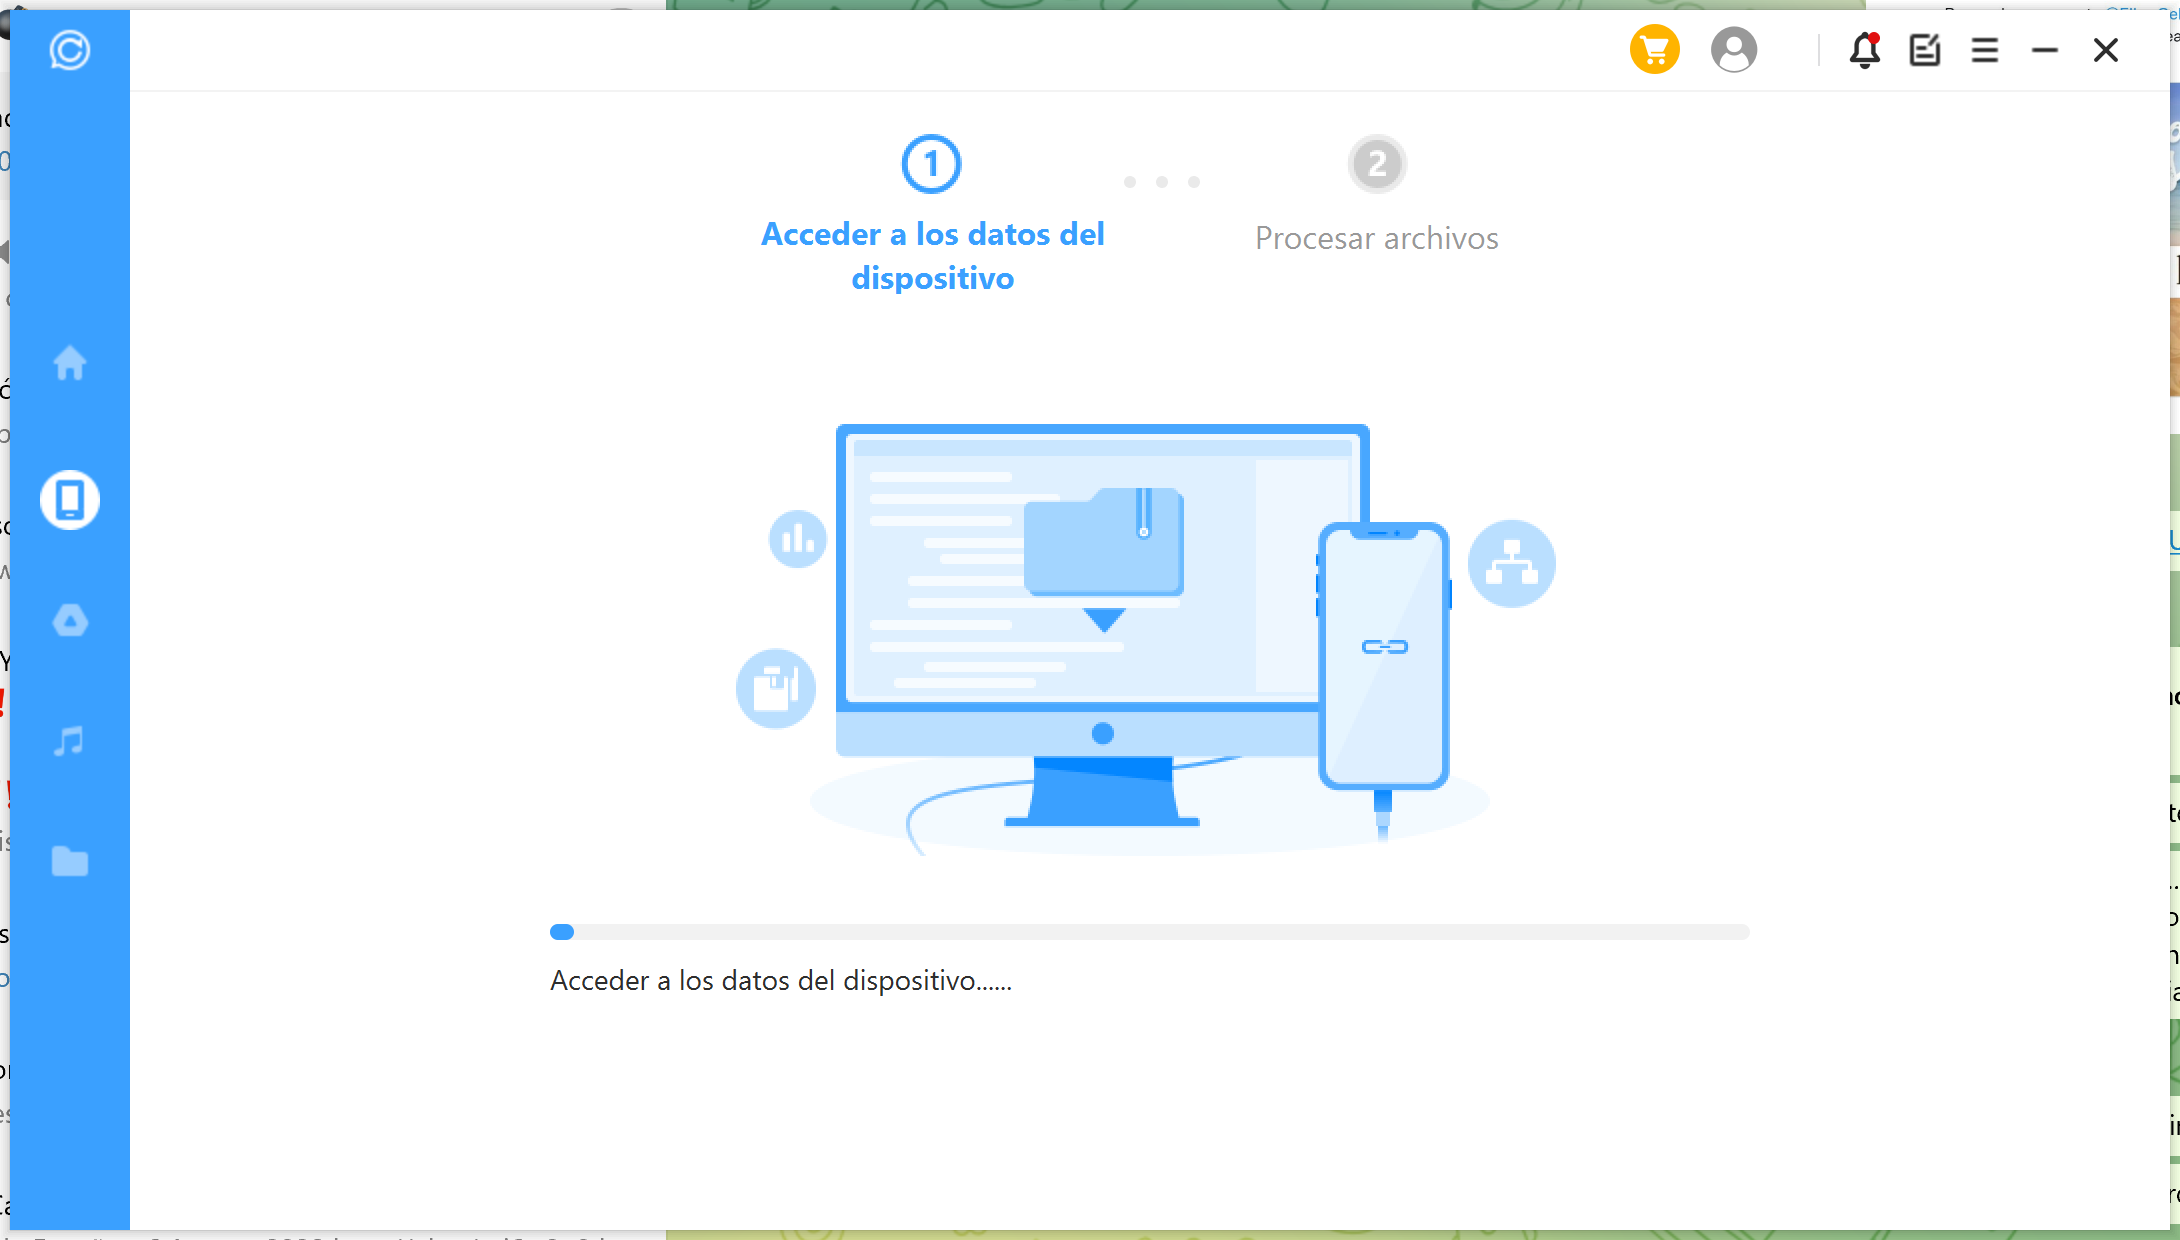 A screenshot of a webpage with a blue background and a white box with a blue outline in the center. The box contains two blue buttons, one labeled "acceder a los datos del dispositivo" and the other labeled "procesar archivos", above a blue progress bar that reads "acceder a los datos del dispositivo...". The webpage is about how to recover lost WhatsApp contact names.